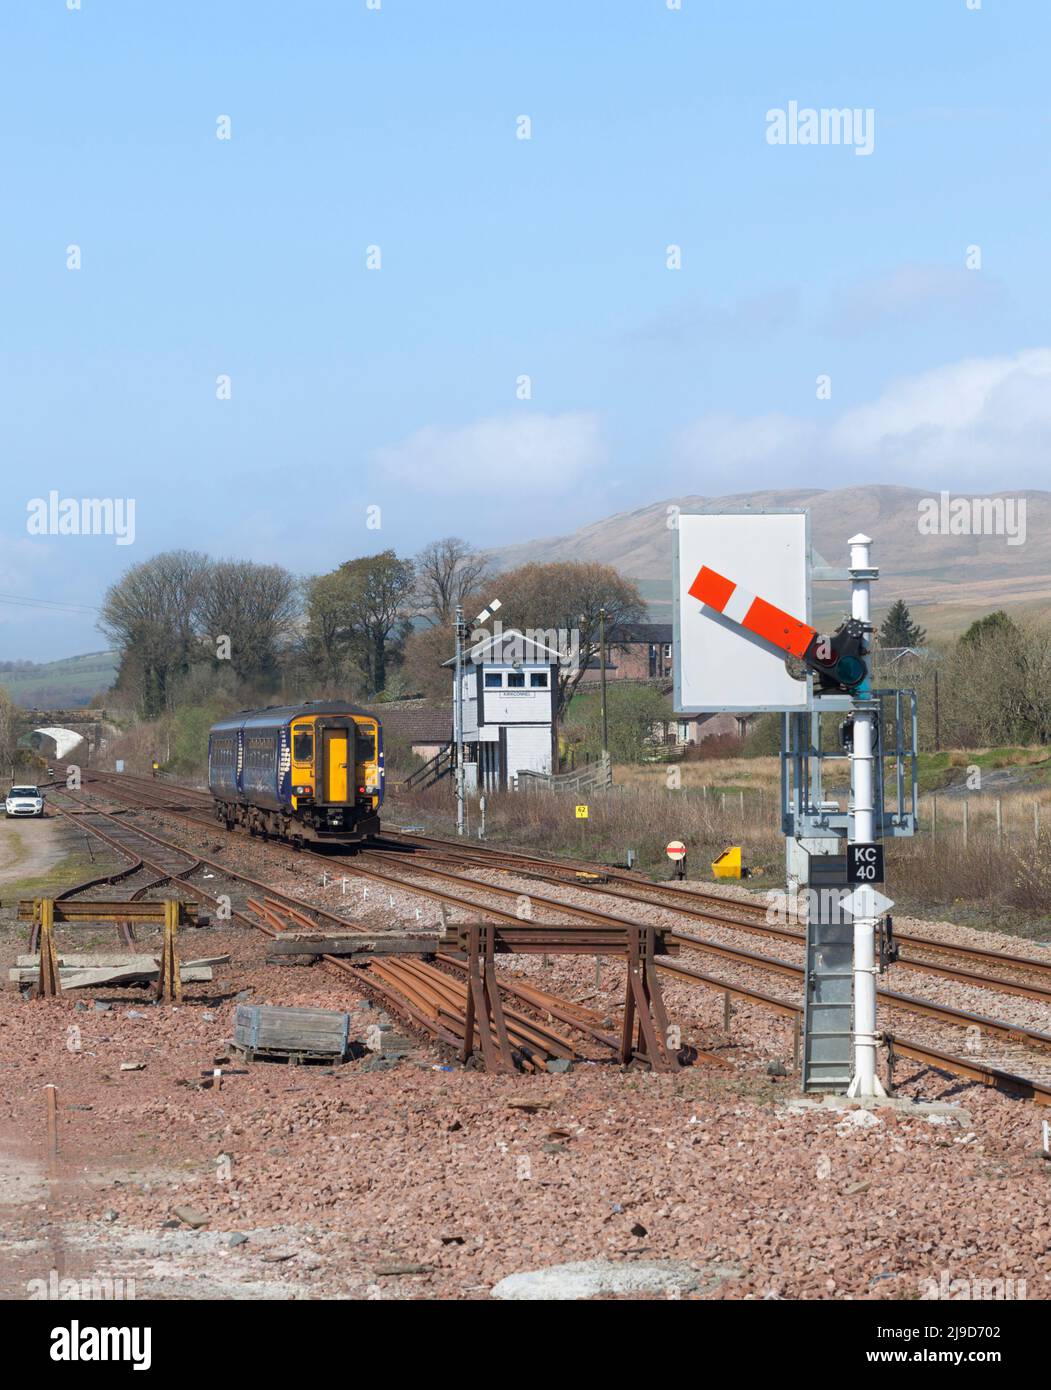 Scotrail class 156 sprinter train 156492 departing from  Kirkconnel with a mechanical signal box and semaphore railway signals Stock Photo